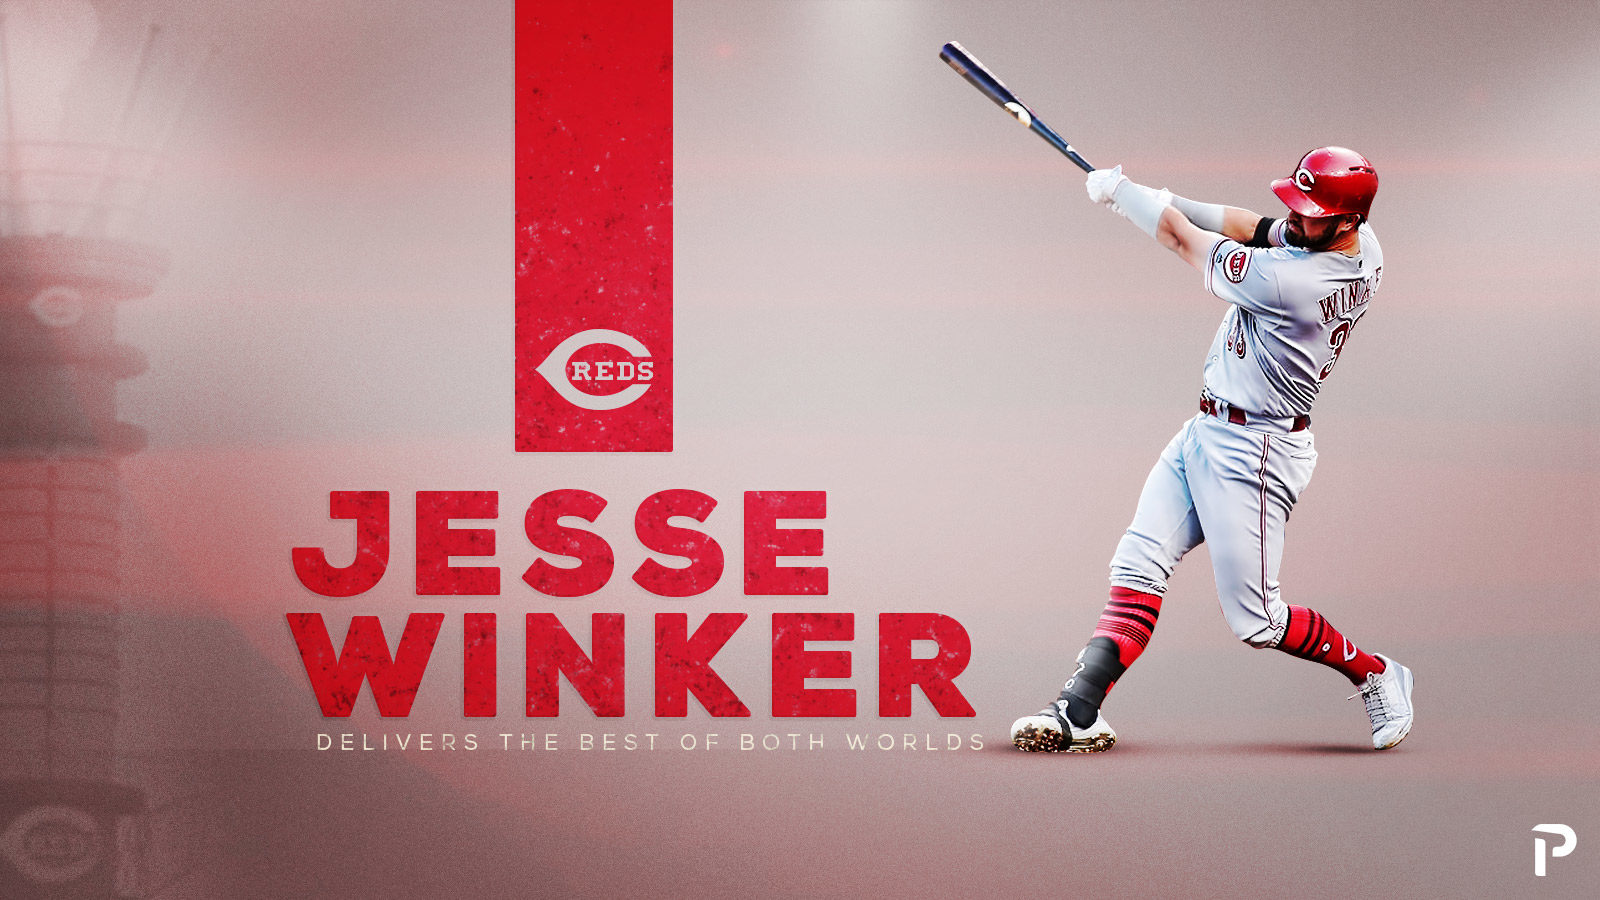 2,000 Jesse winker Stock Pictures, Editorial Images and Stock Photos